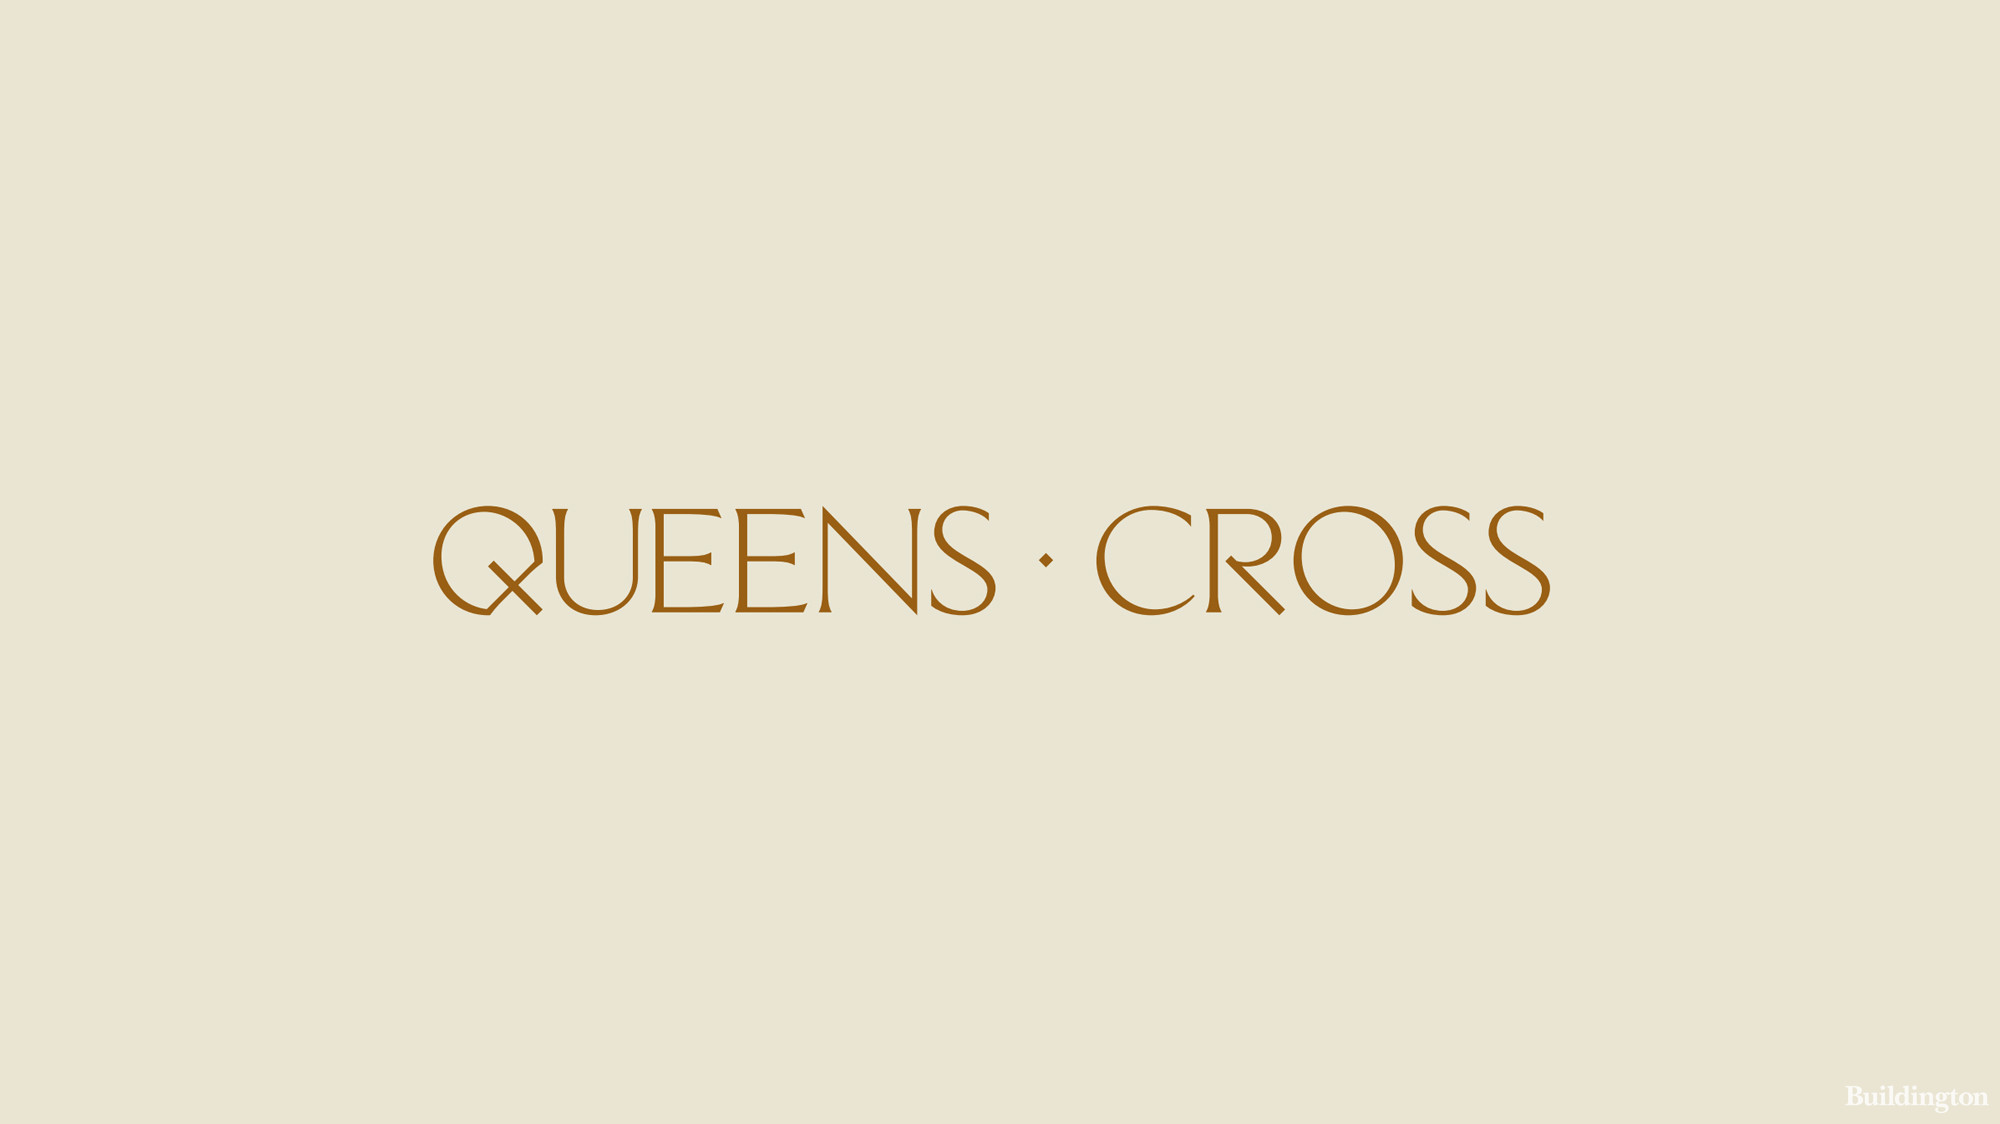 Logo cover for Queens Cross development by Mount Anvil in the Royal Docks